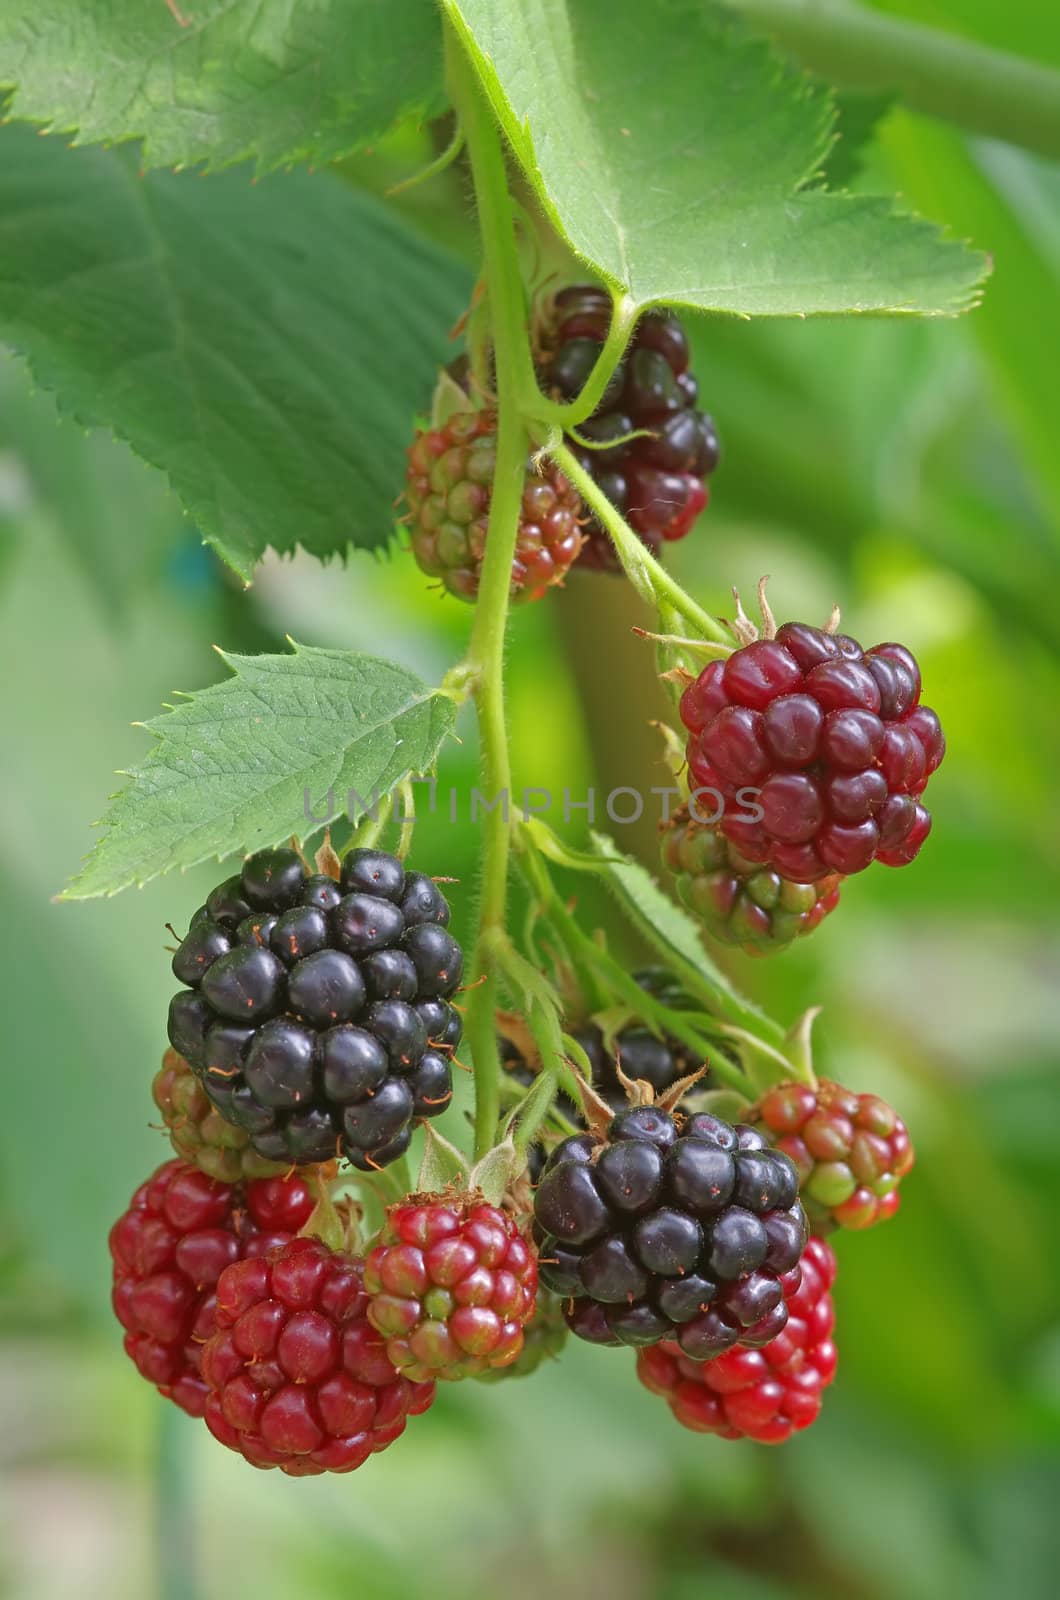 A cluster of blackberry with red and black ones